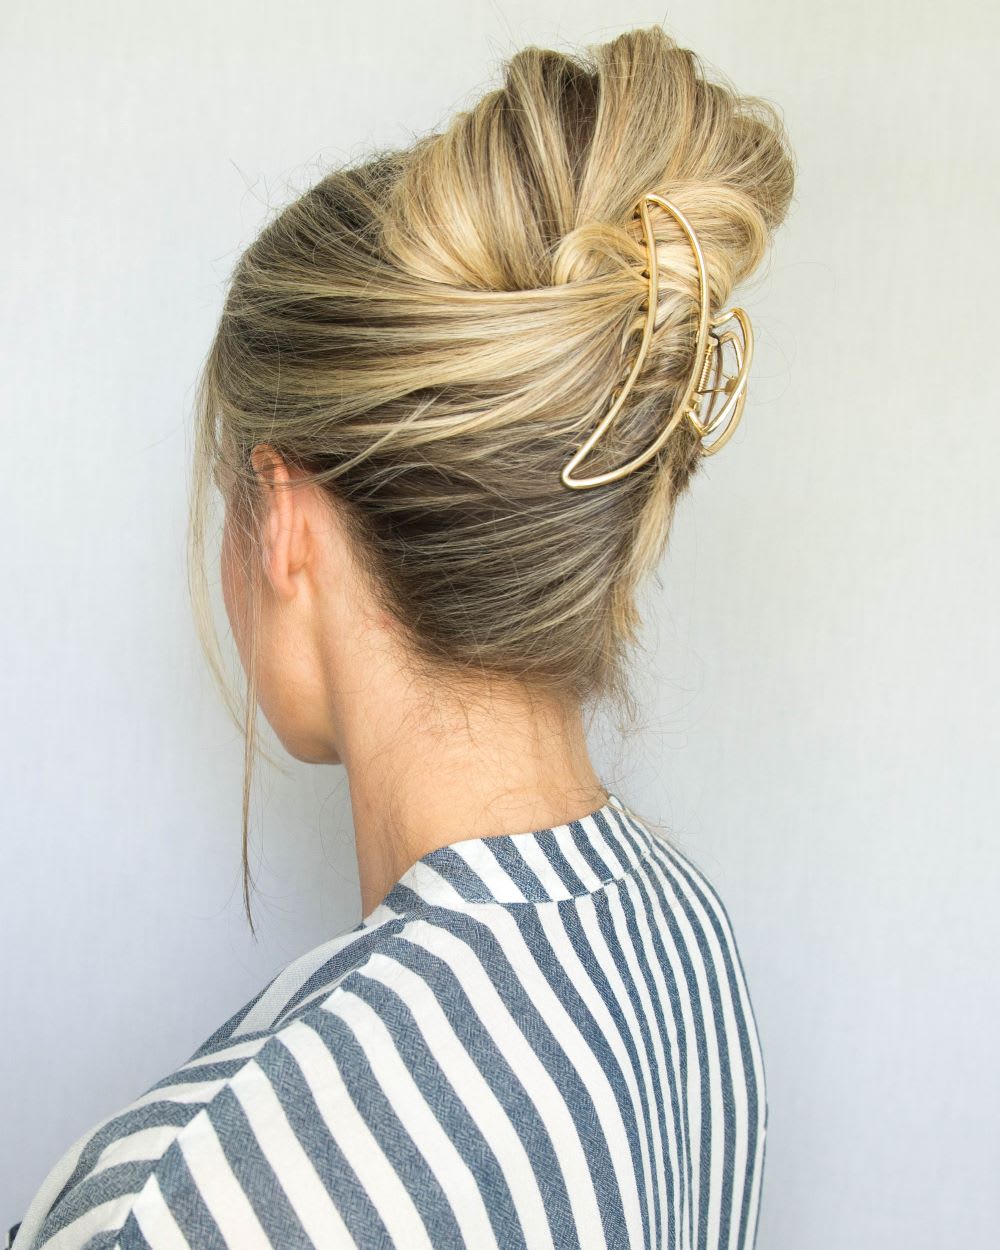 Classic 1960s Bouffant · Extract from Braids, Buns, and Twists! by  Christina Butcher · How To Style An Updo Hairstyle